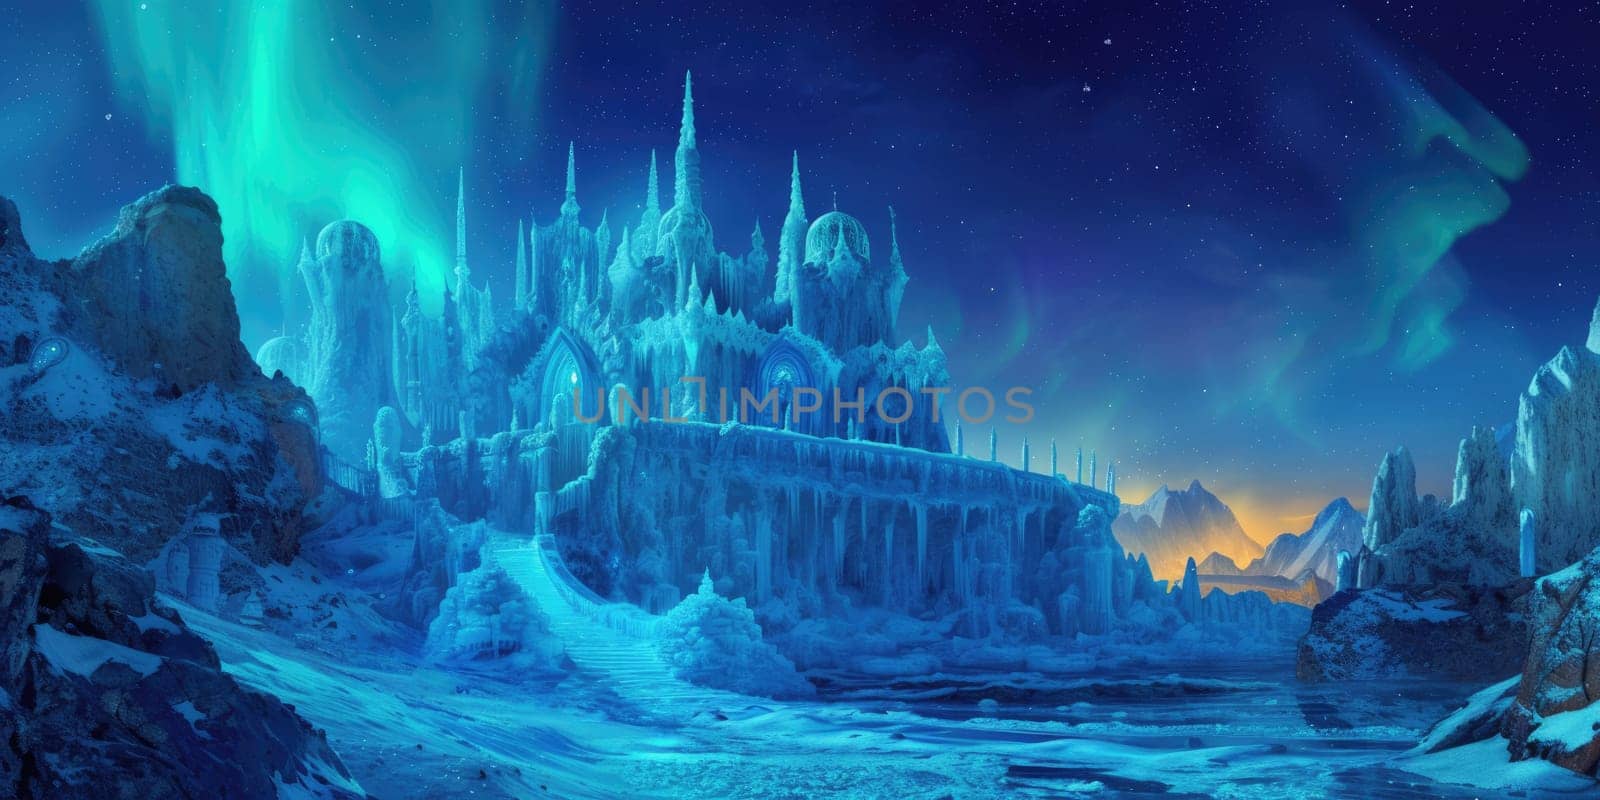 A magical winter wonderland at night, with ice castles. Resplendent. by biancoblue